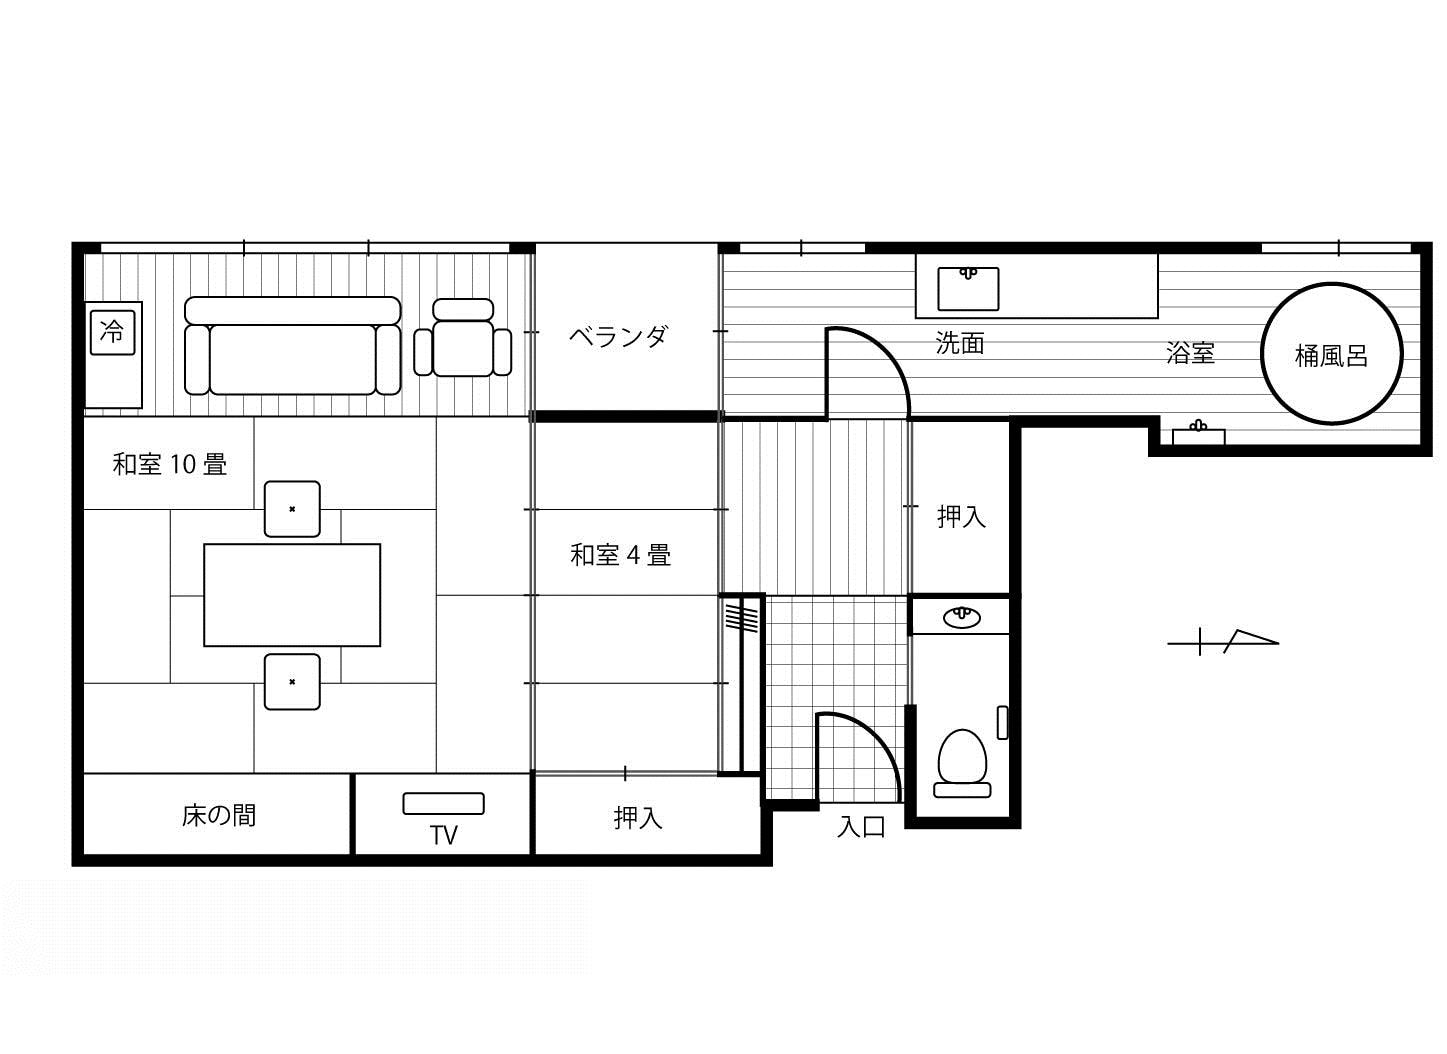 Guest room with hot spring & massage chair (plan)